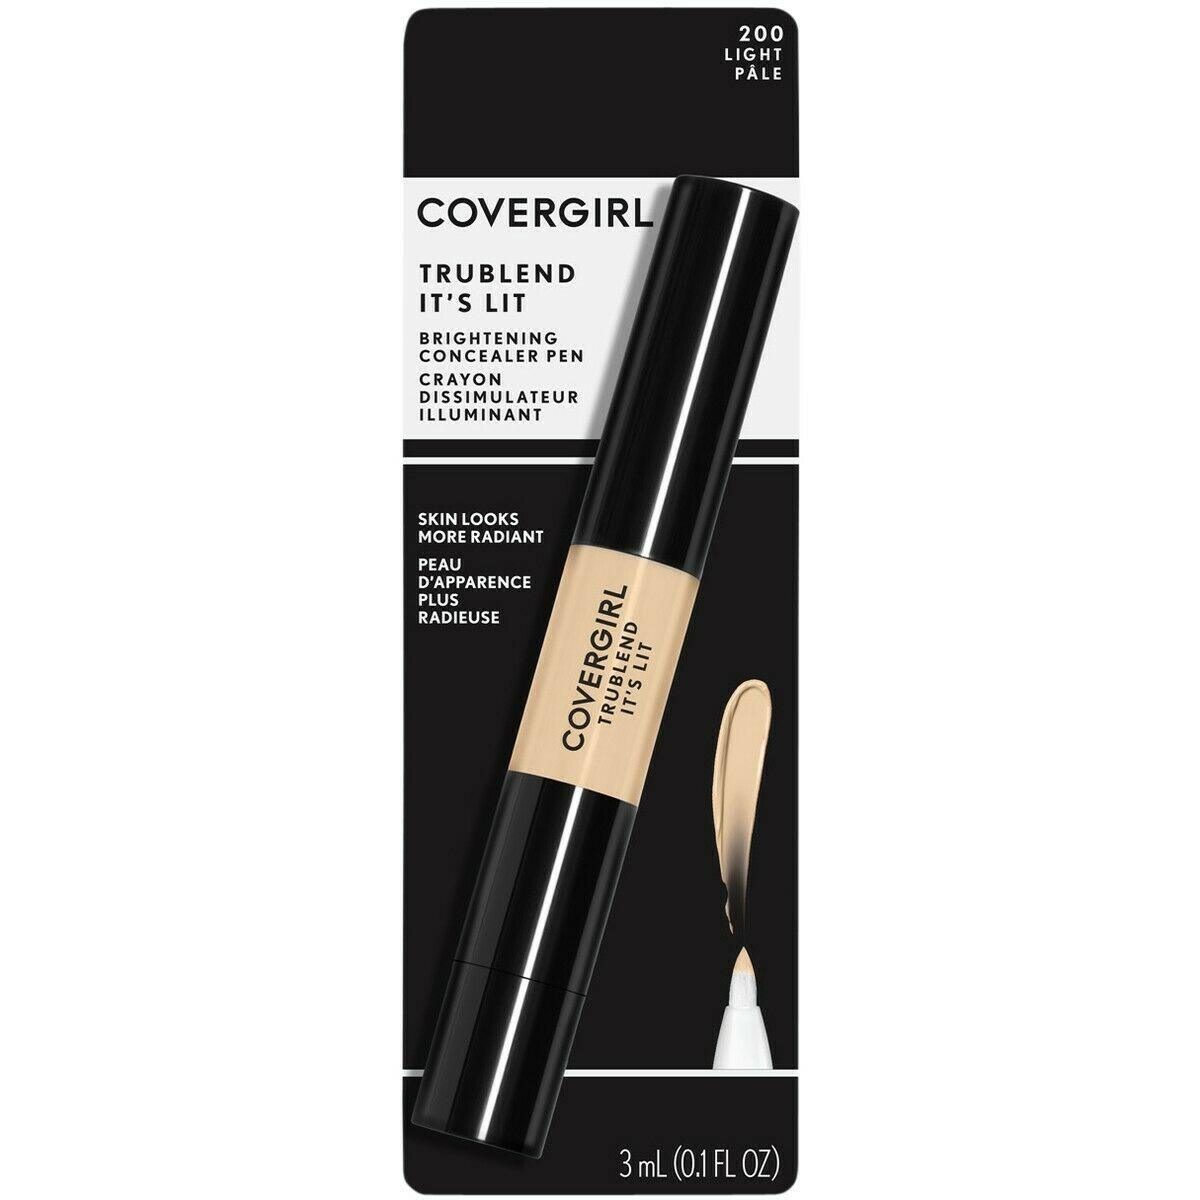 Covergirl Brightening Concealer Pen Trublend 200 Light 3ml- Carded - www.indiancart.com.au - Foundations & Concealers - Covergirl - Covergirl